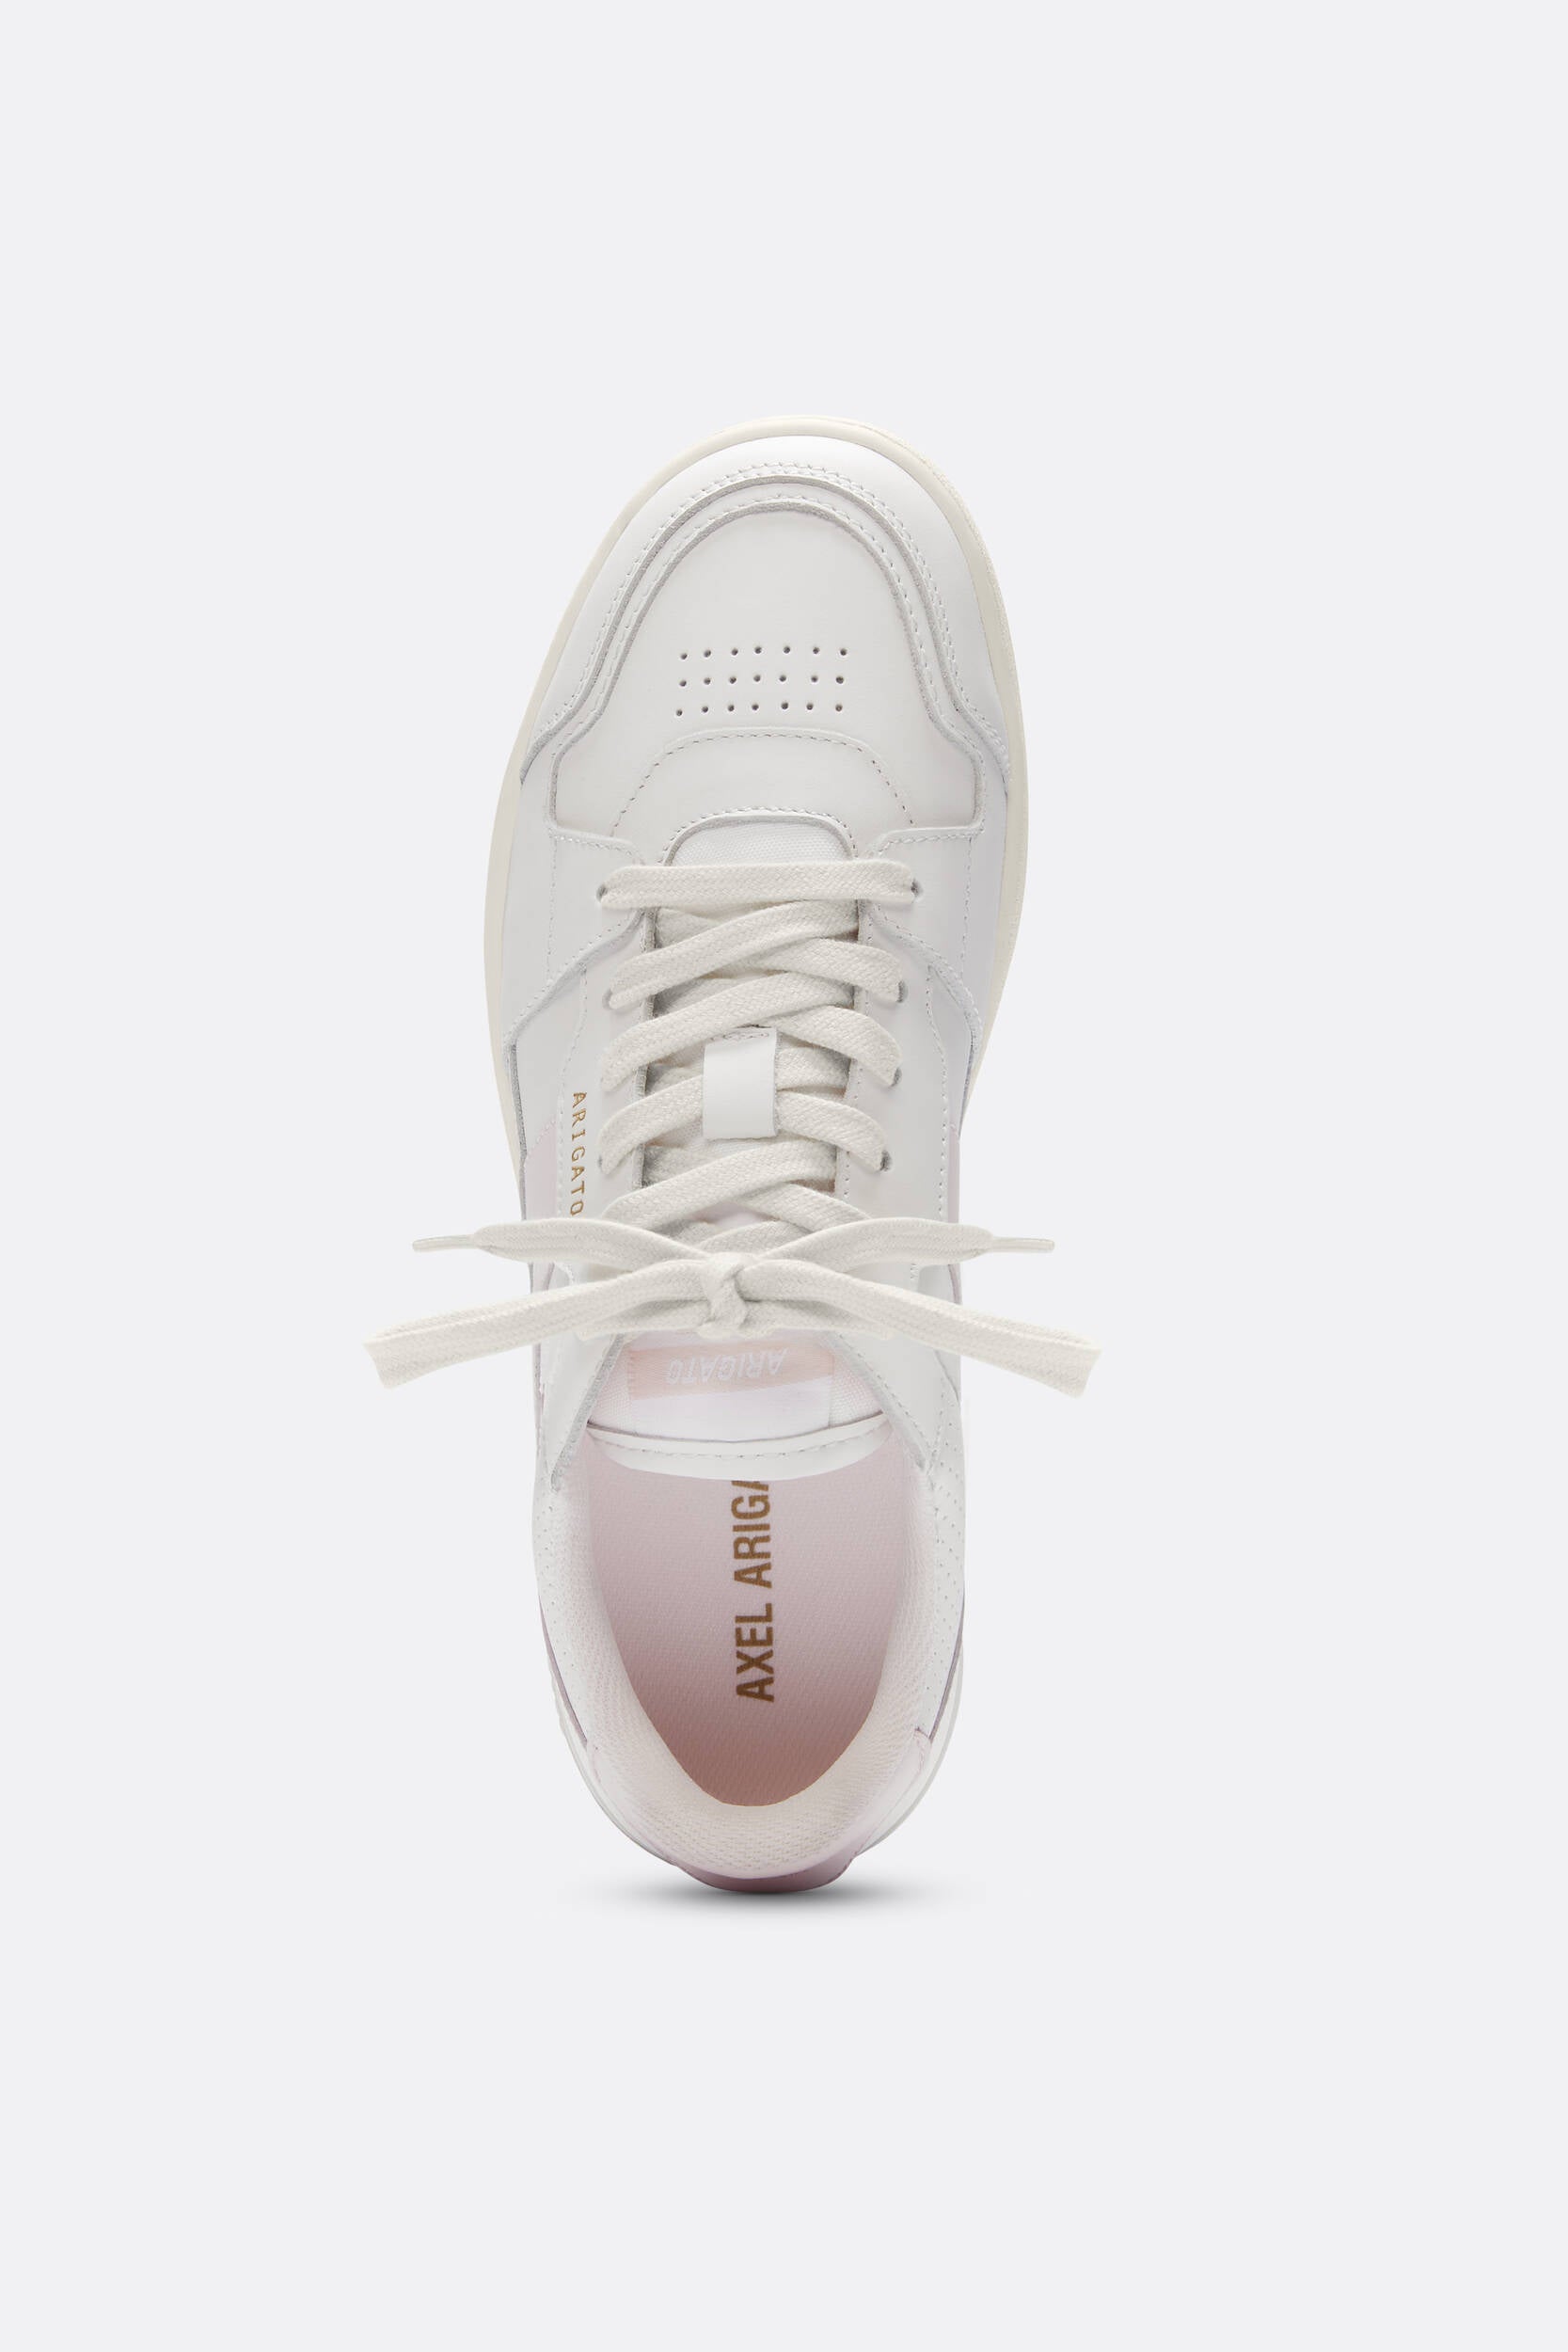 Dice-A Sneaker - White/Pink